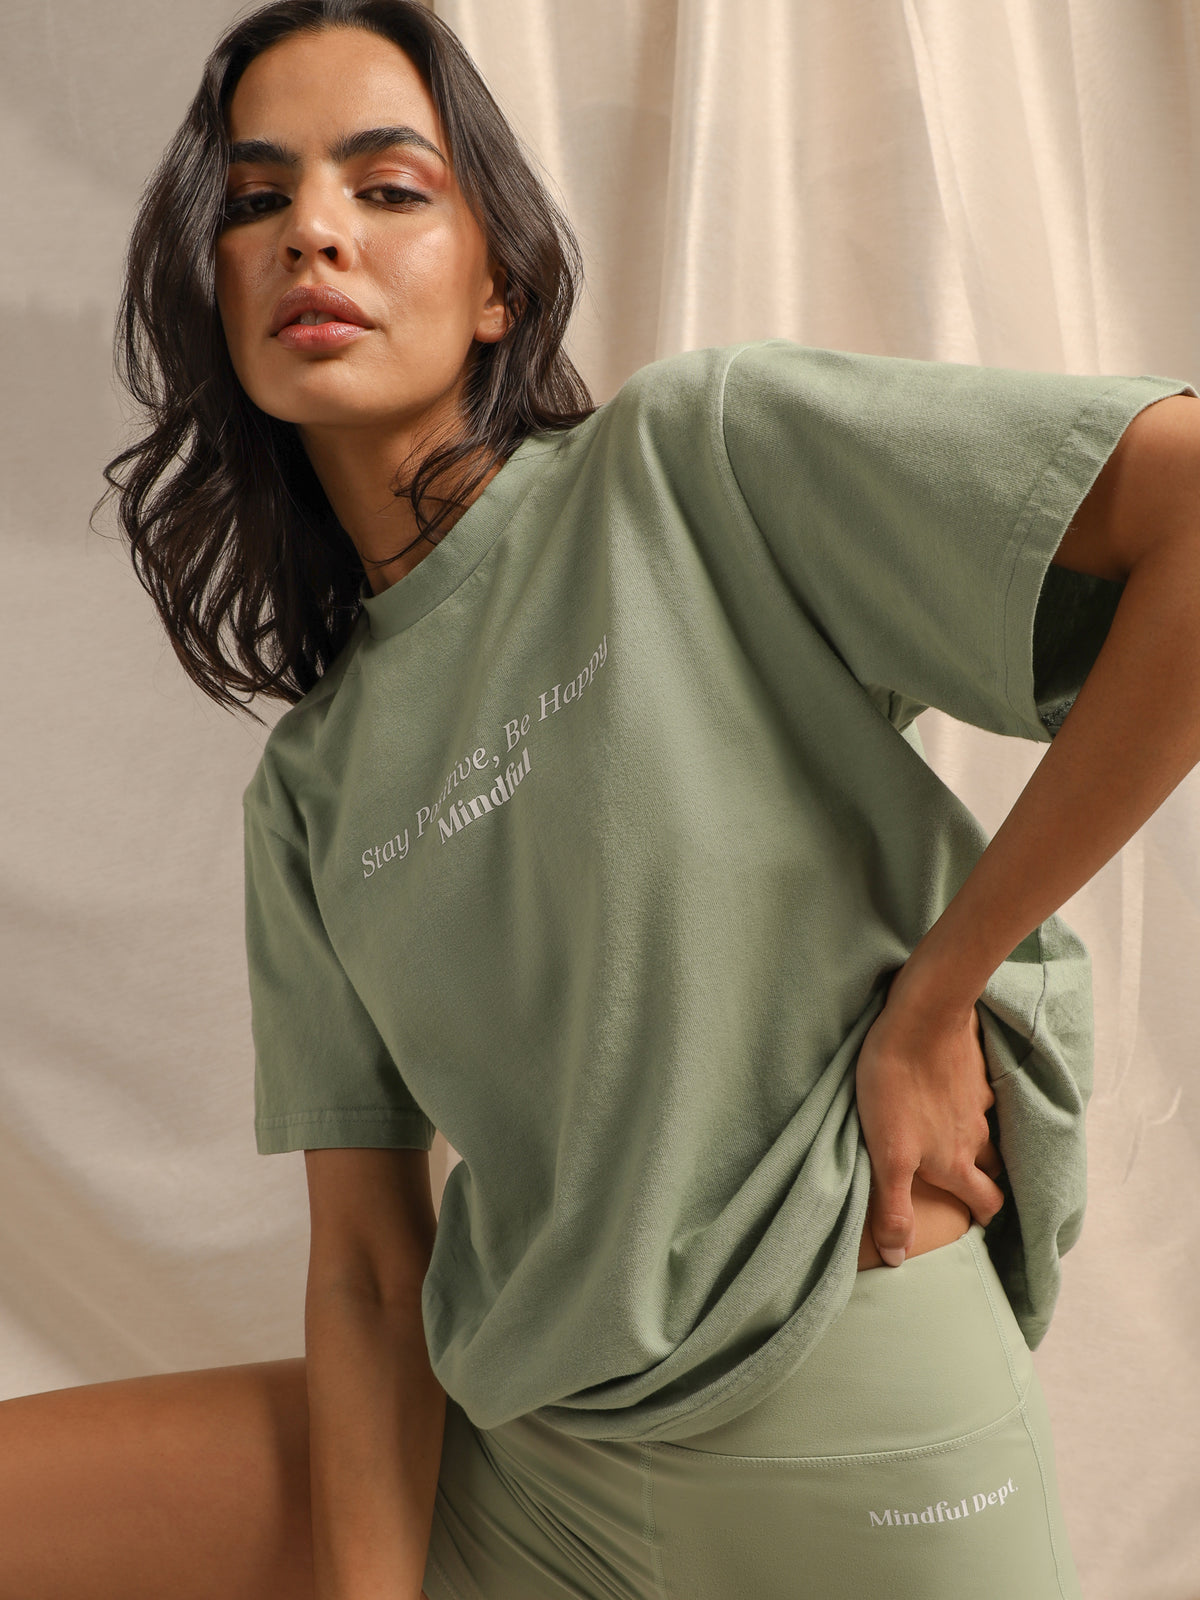 Positive Vibes Only T-Shirt in Sage